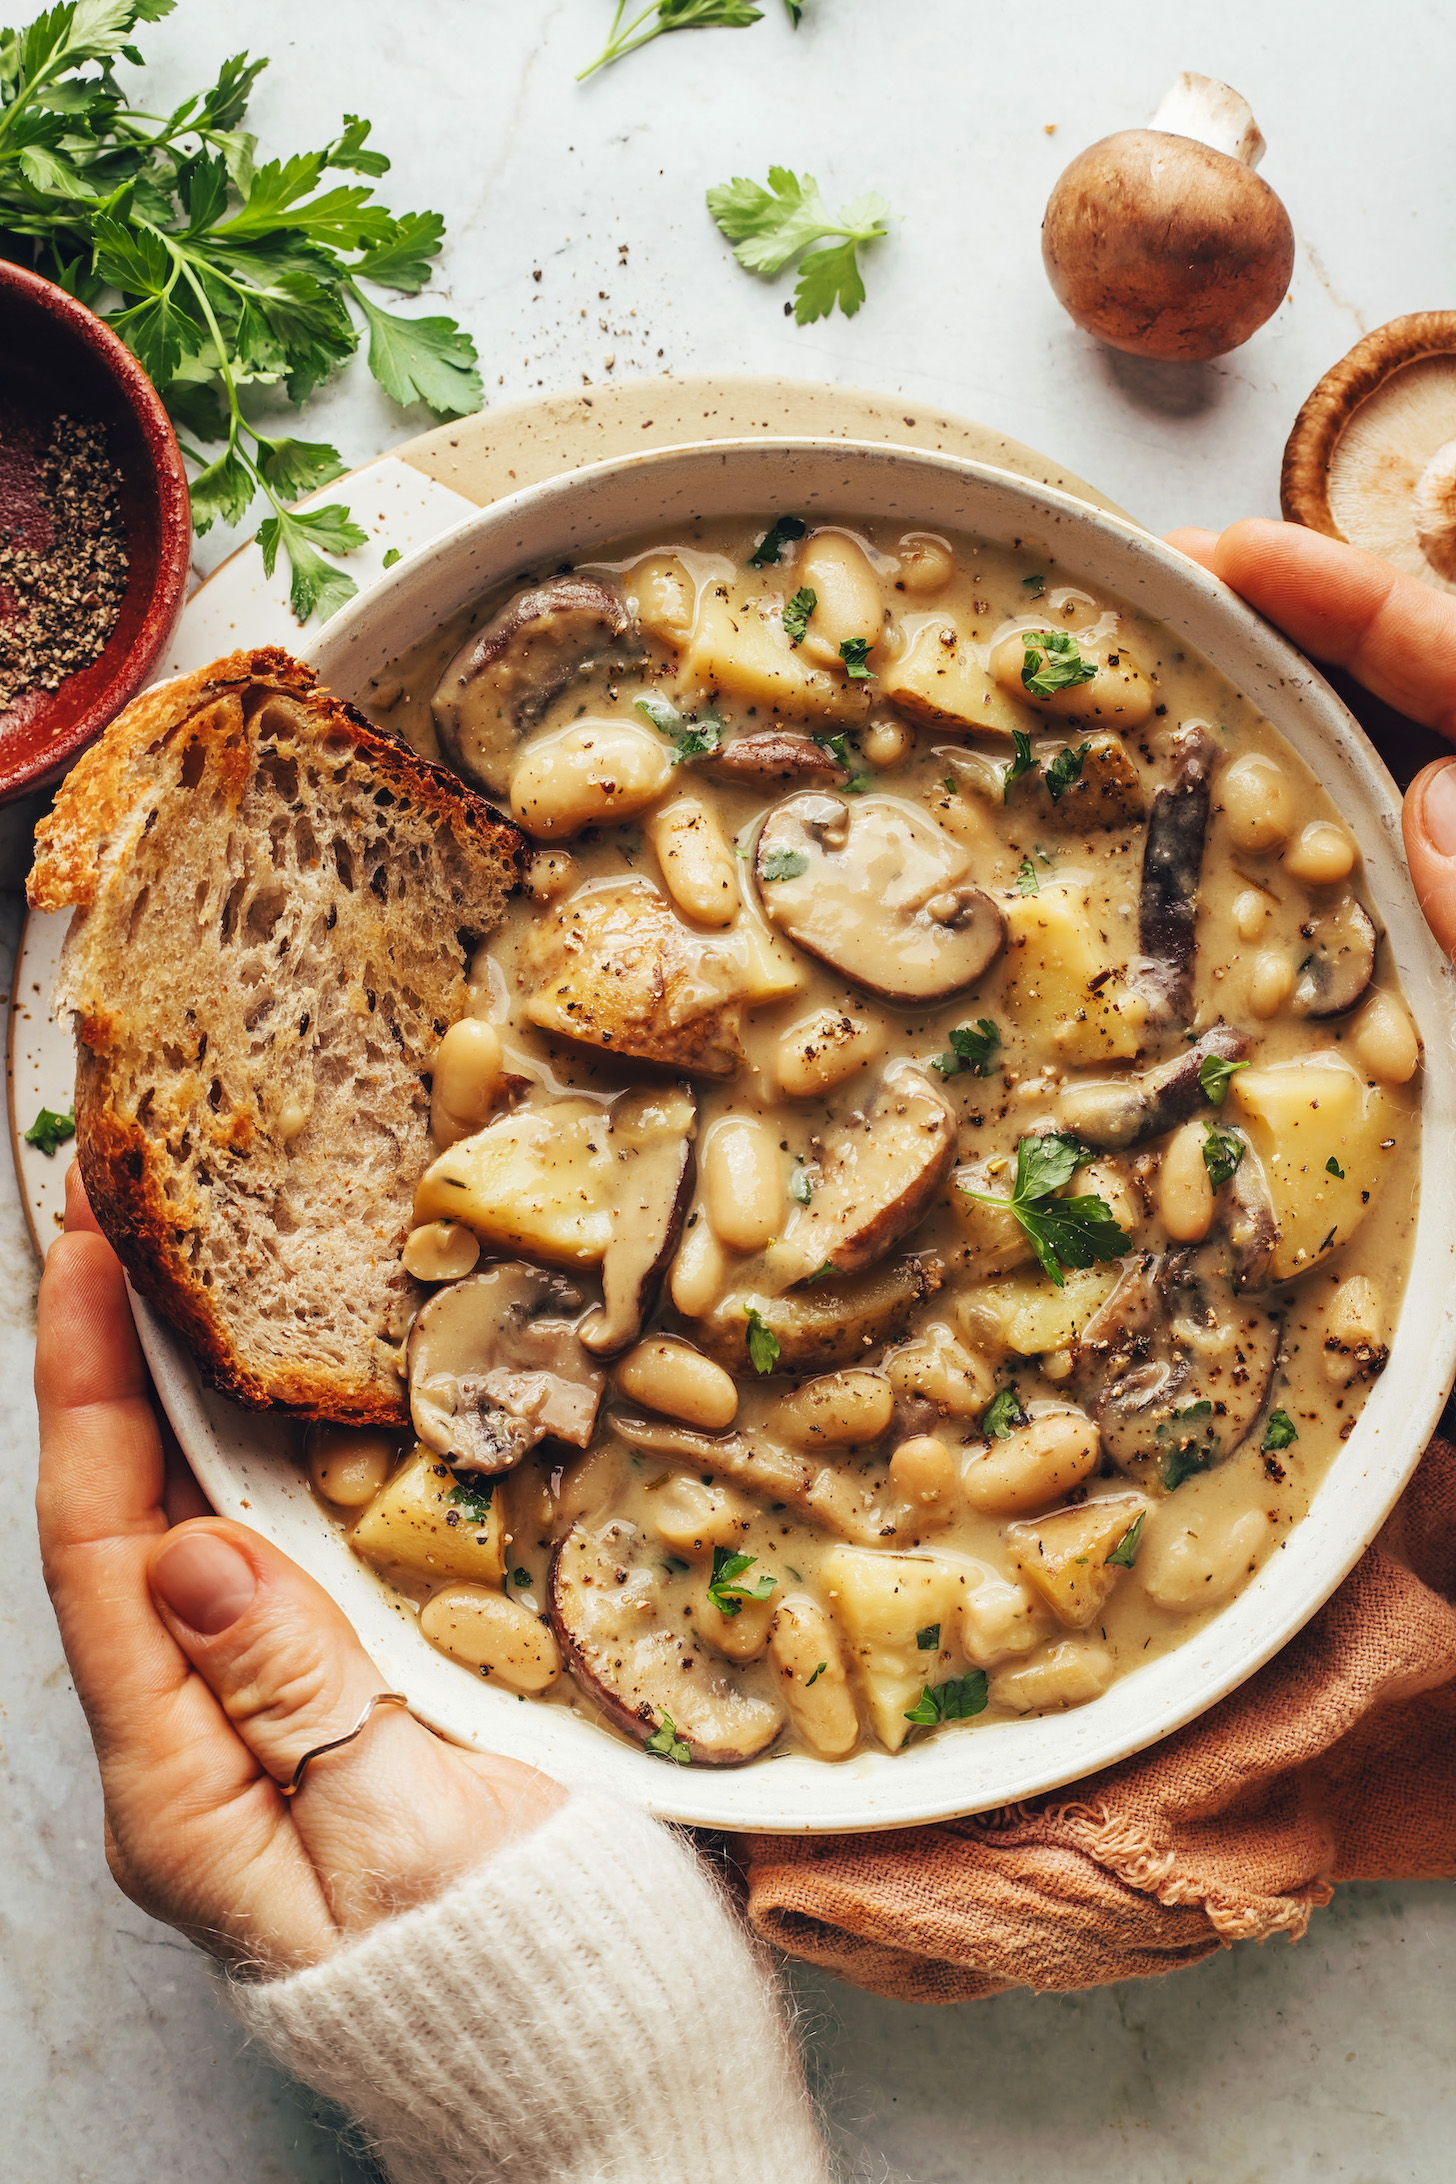 Hands holding a bowl of vegan white bean mushroom stew with slices of toasted bread.